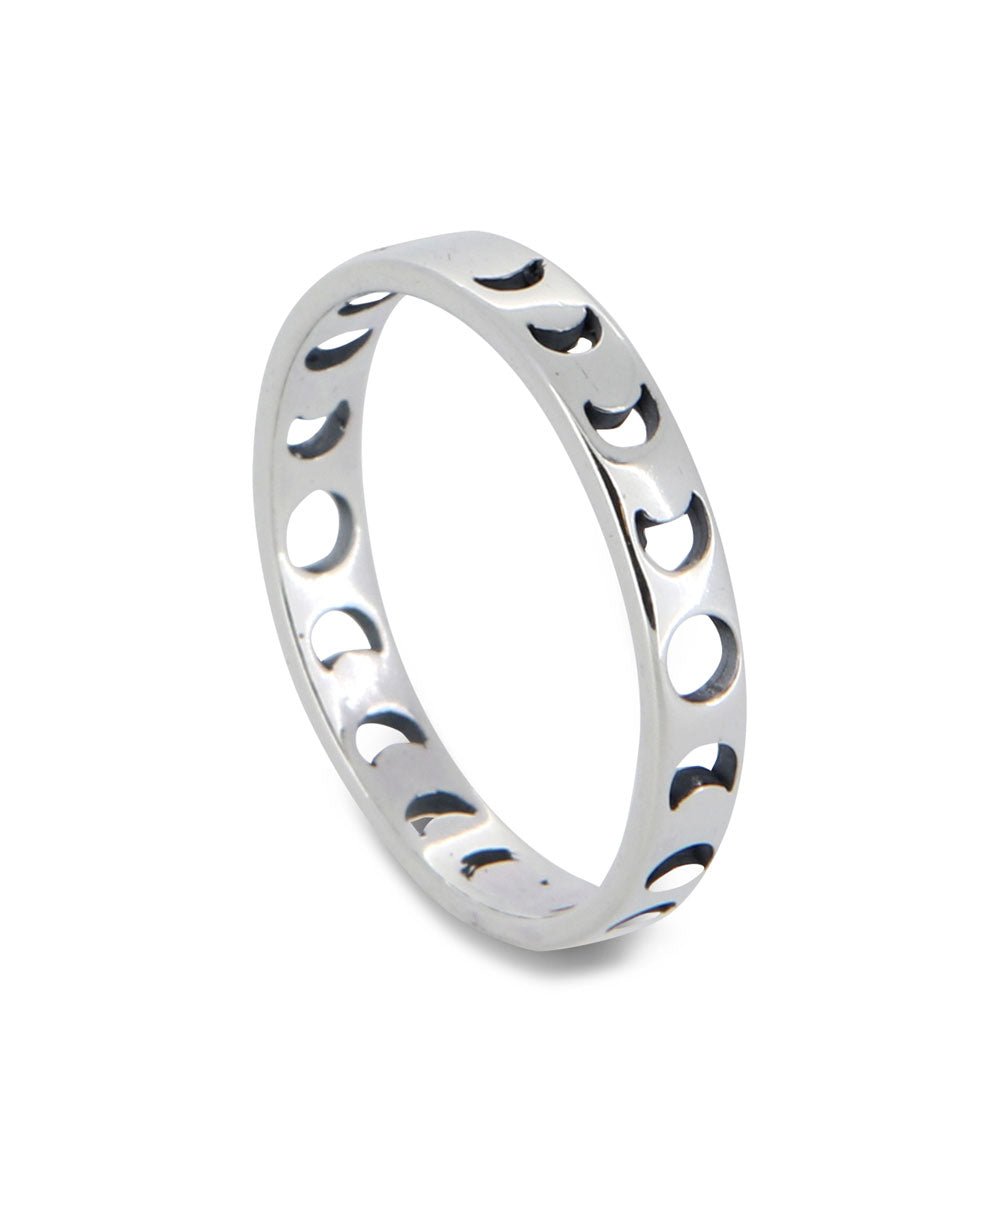 Moon Phase Sterling Silver Band Ring - Size 6